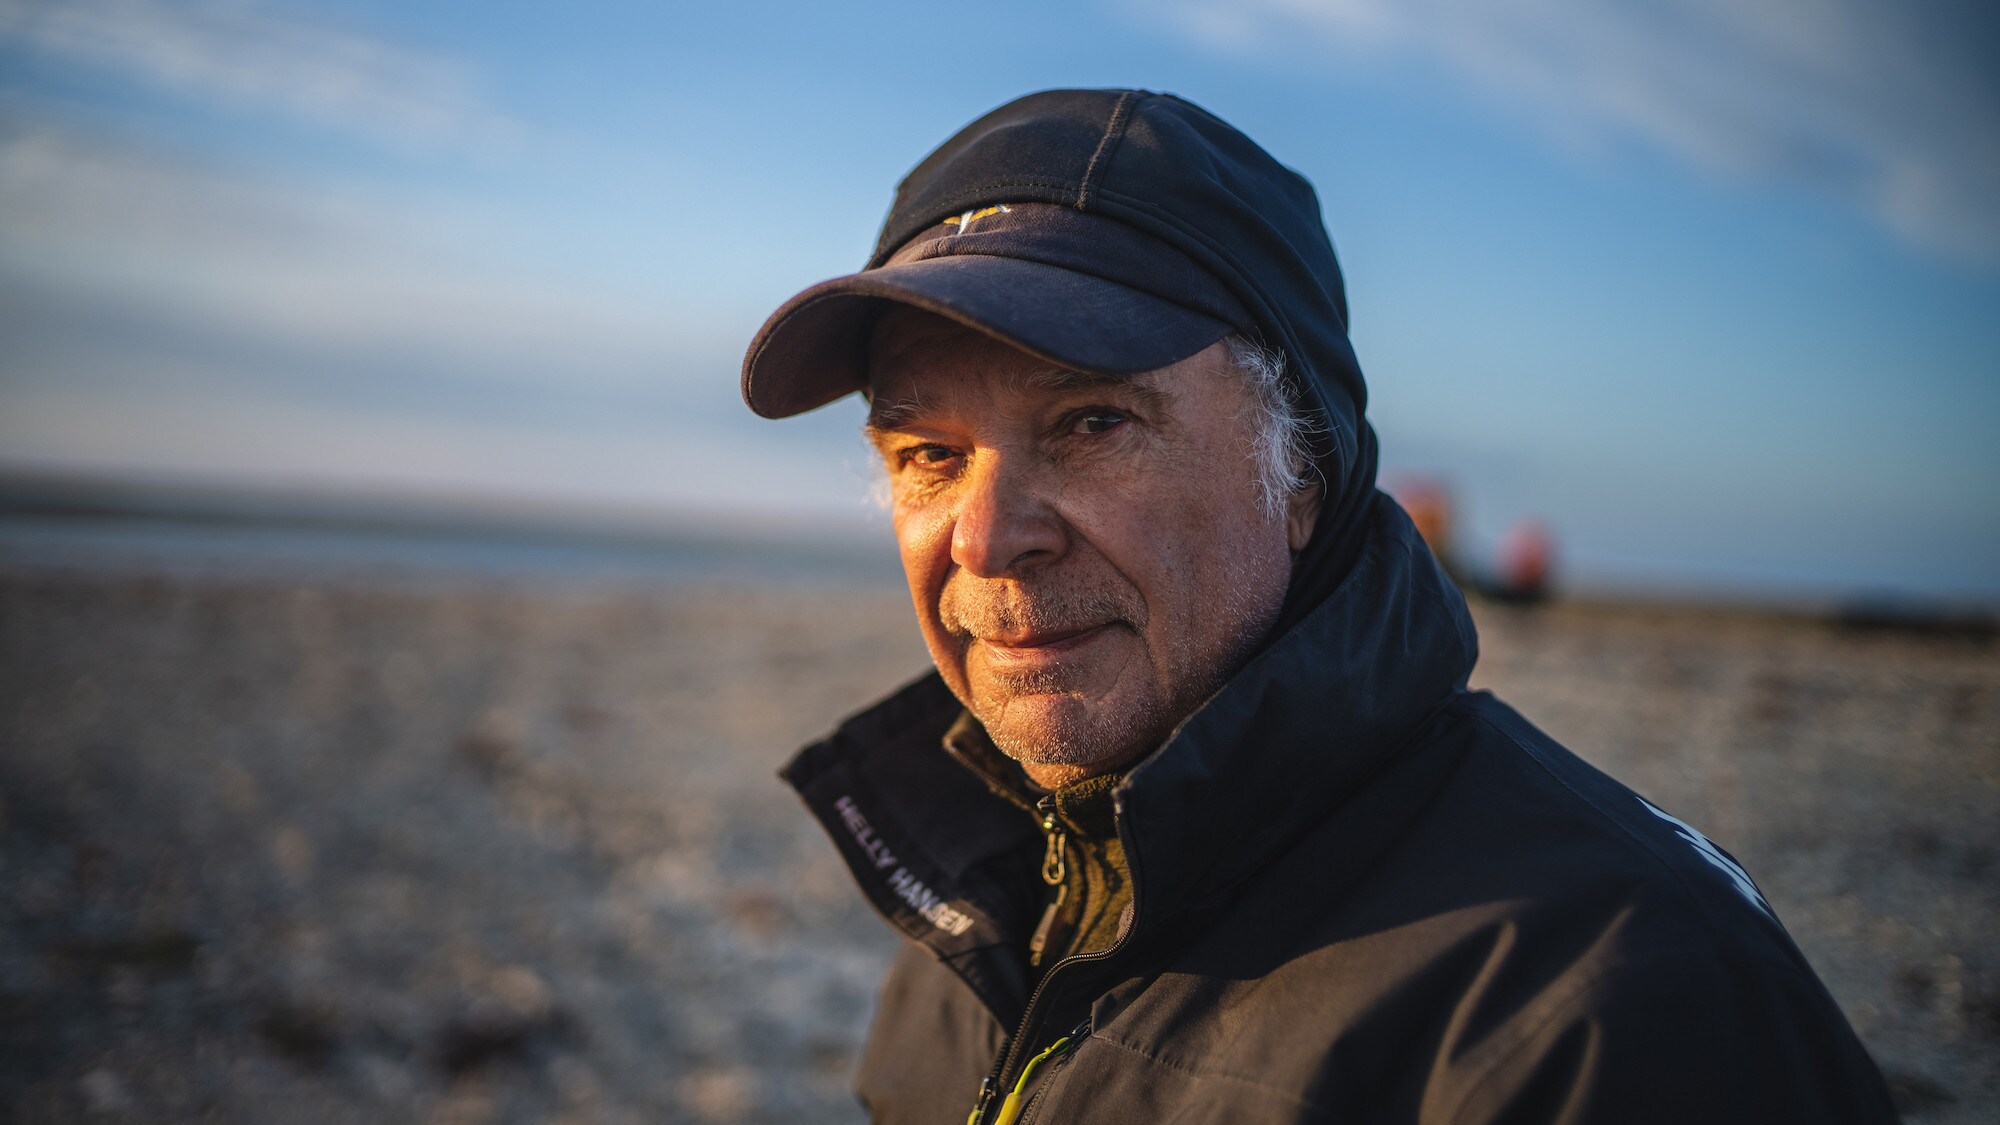 Franklin historian Tom Gross looks on at sunset on King William Island, Nunavut, Canada. He is part of a team searching for Sir John Franklin's lost tomb on King William Island, Nunavut, Canada. (National Geographic/Renan Ozturk)